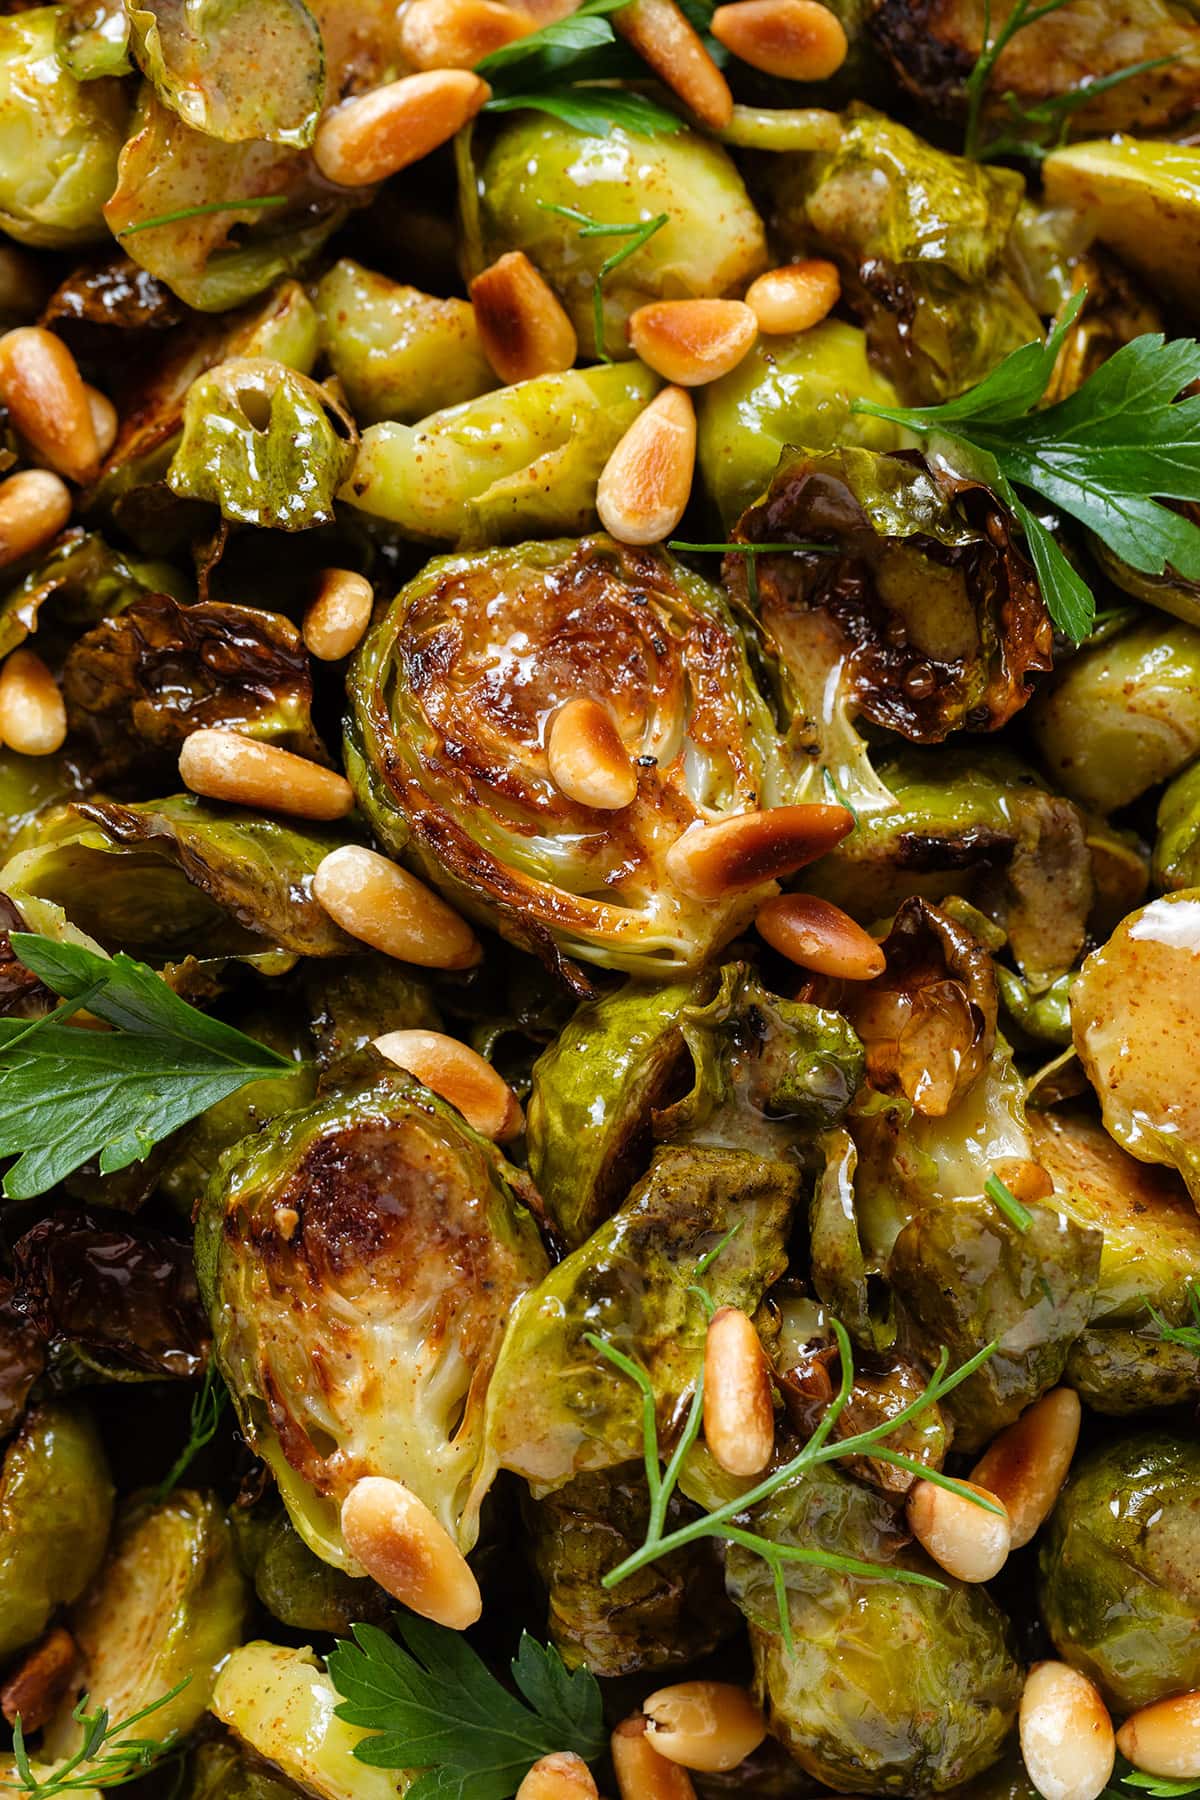 Charred brussels sprouts with a mustard vinaigrette, fresh parsley, and toasted pine nuts.